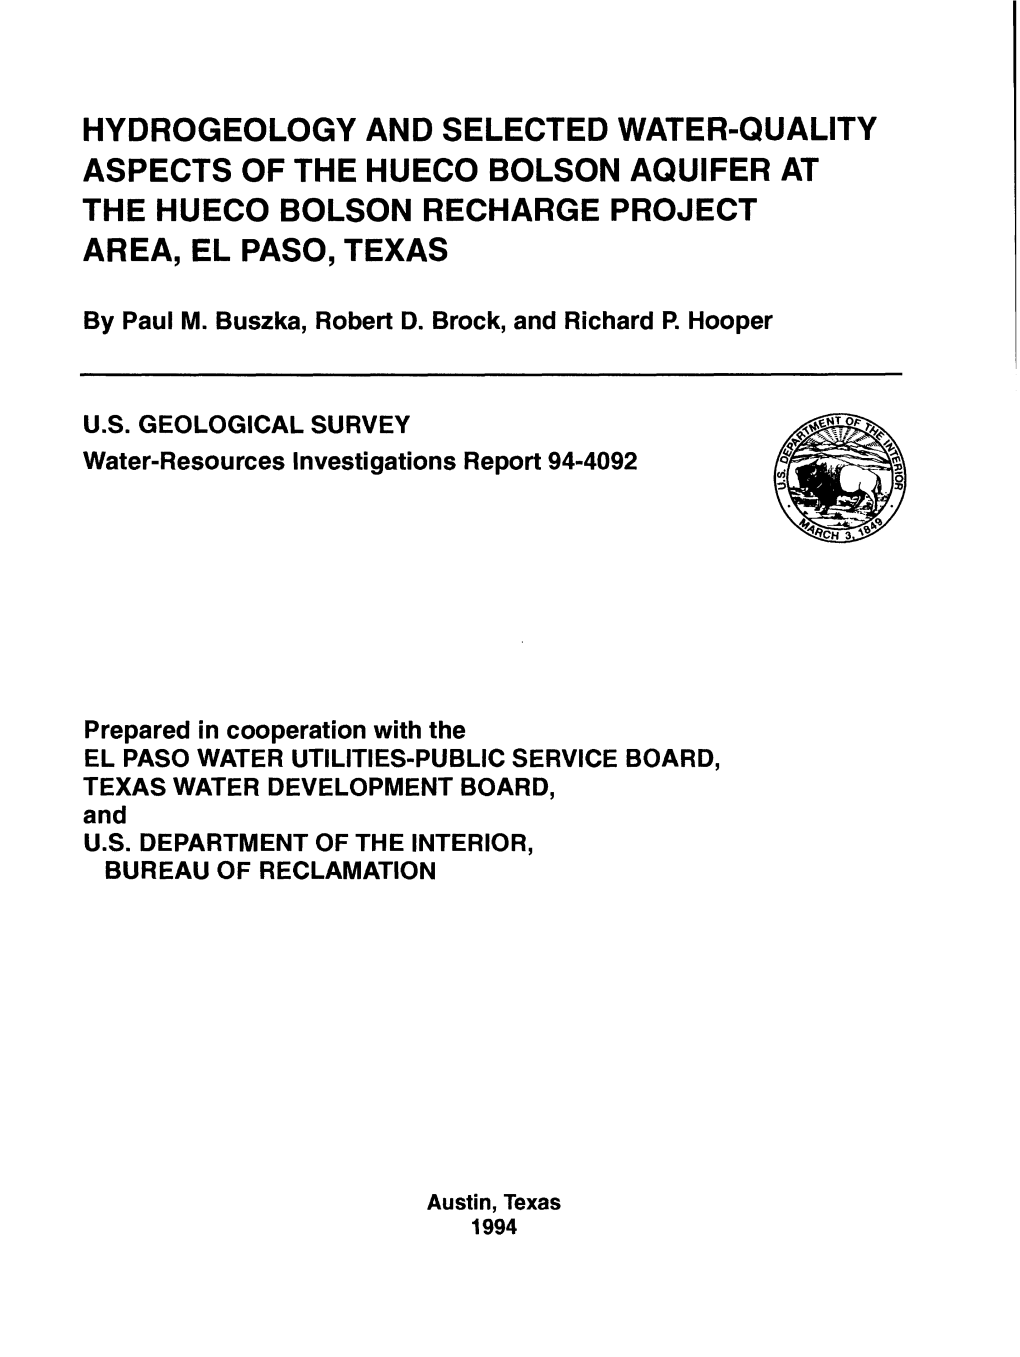 Hydrogeology and Selected Water-Quality Aspects of the Hueco Bolson Aquifer at the Hueco Bolson Recharge Project Area, El Paso, Texas